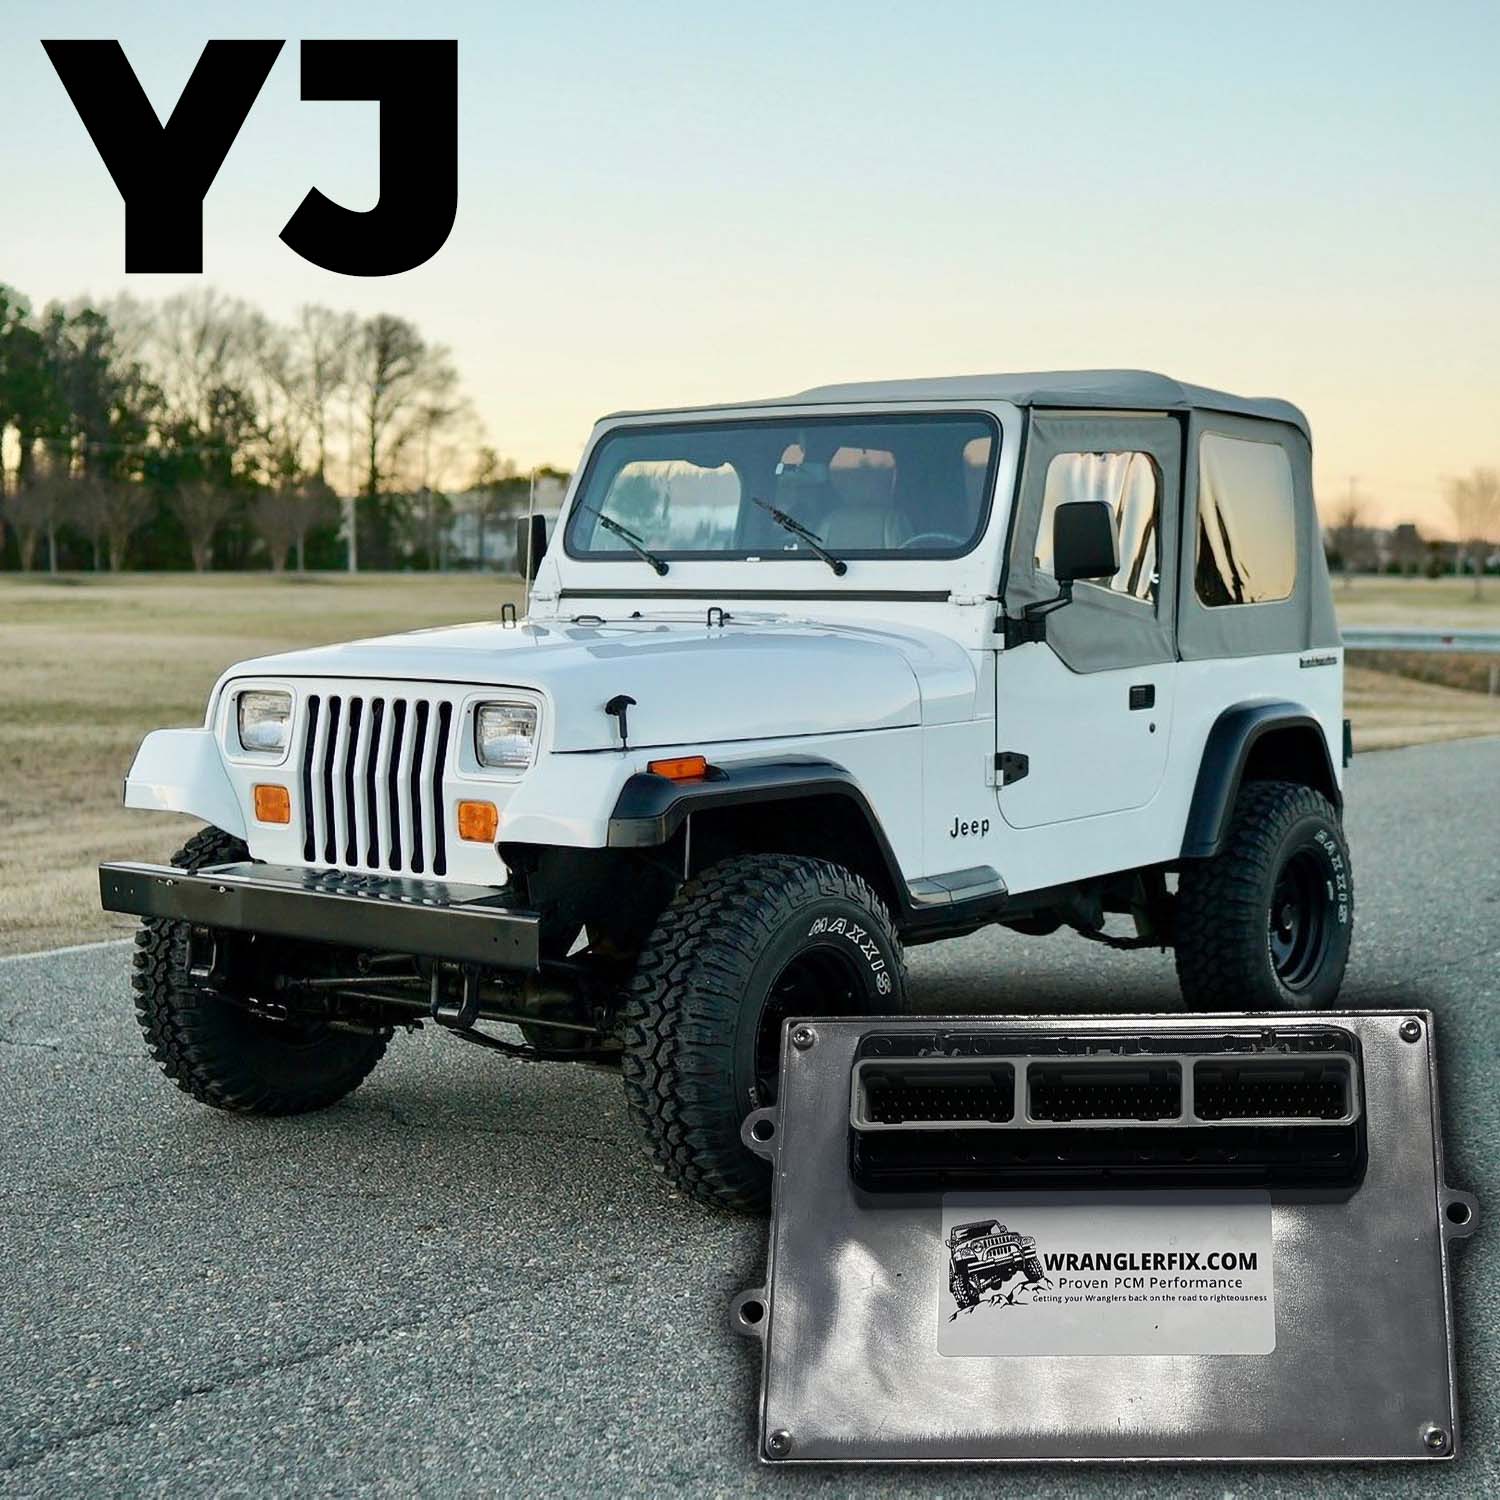 Jeep Wrangler YJ (1986-1995) Replacement PCMs - Wrangler Fix